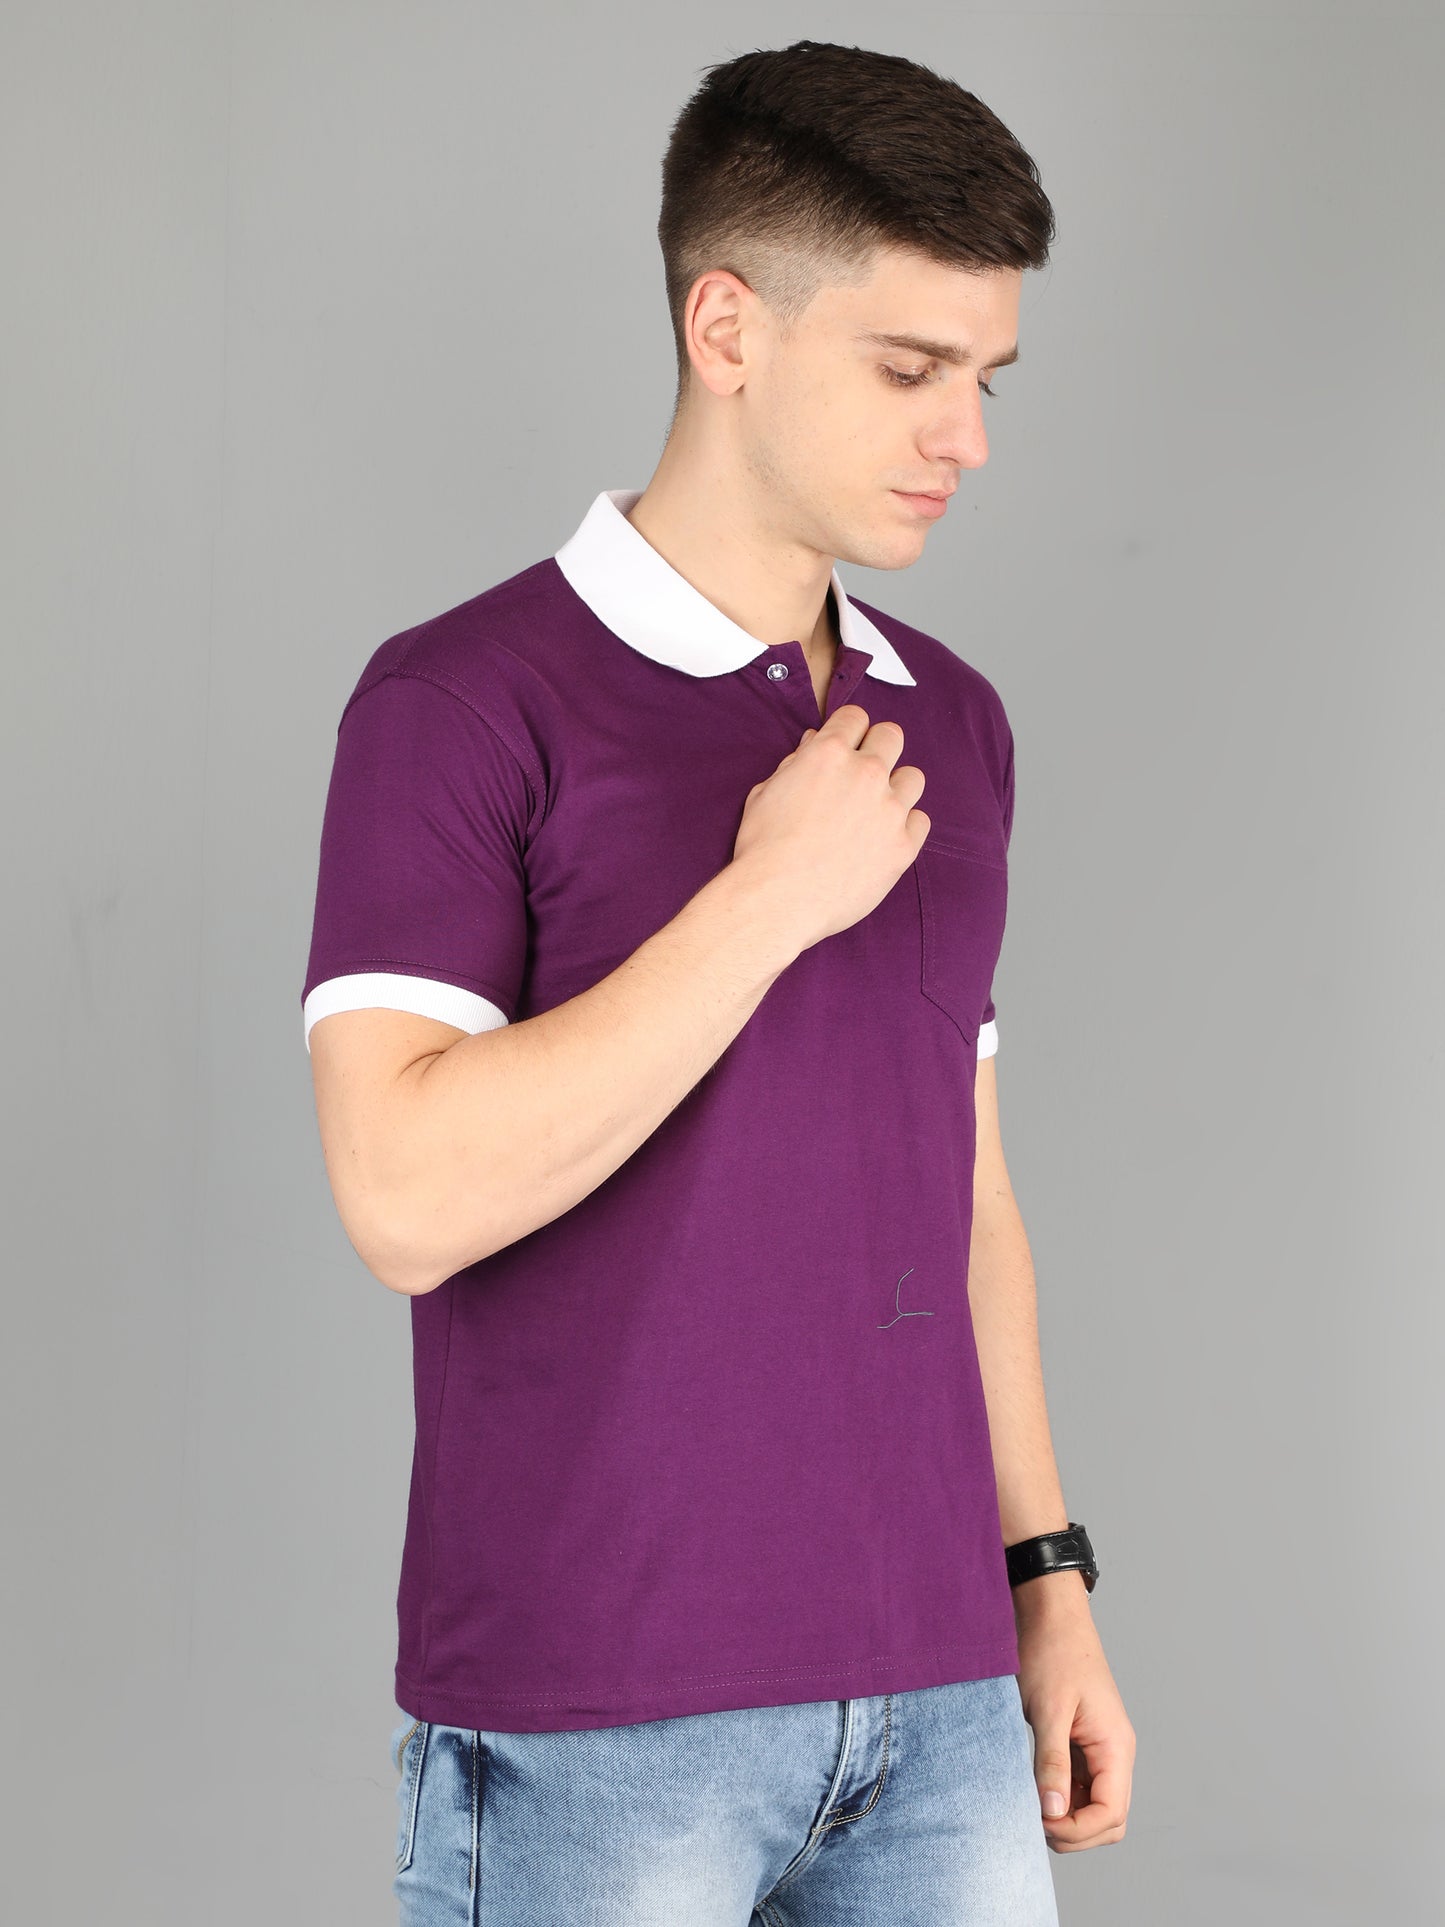 Men's Cotton Polo Neck Half Sleeve Opposite Collar Cuff T-Shirt - (Pack of 2)